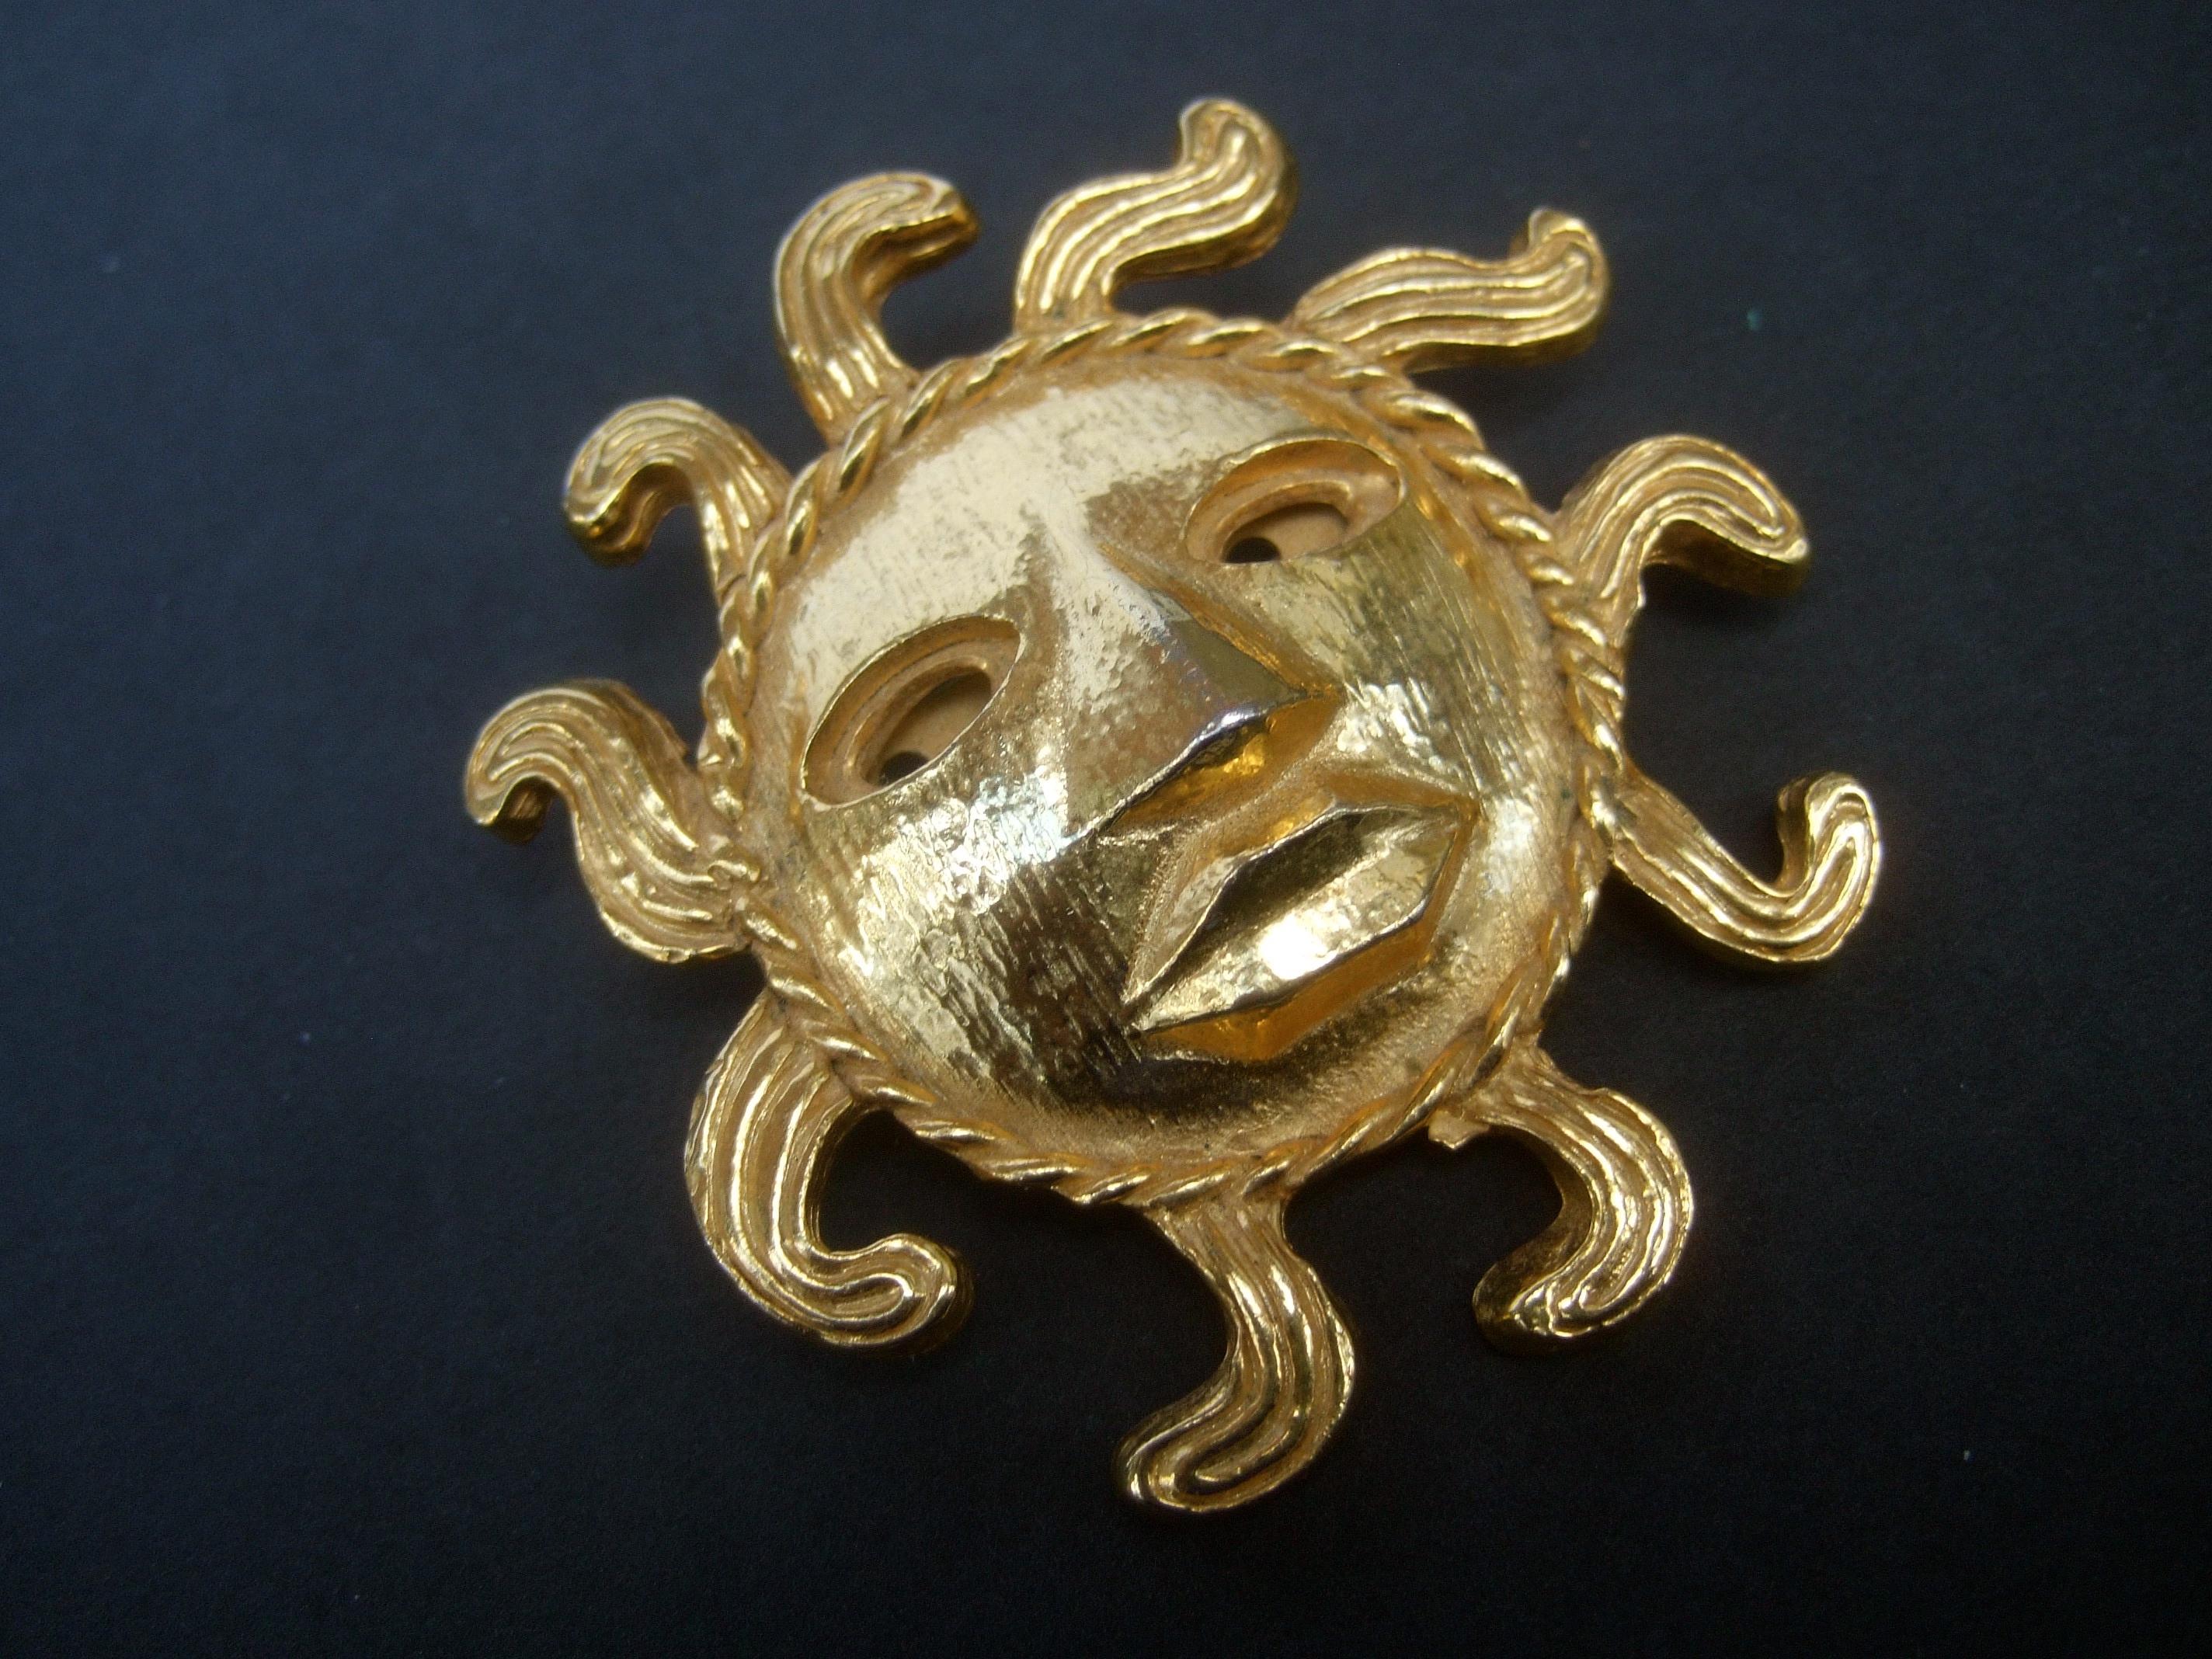 French Figural radiating sun beam brooch designed by Barol Paris
The chic designer brooch depicts a figural sun sheathed in luminous gilt matte metal plating

The sun face has a textured brushed finish; in contrast the radiating sun beams have